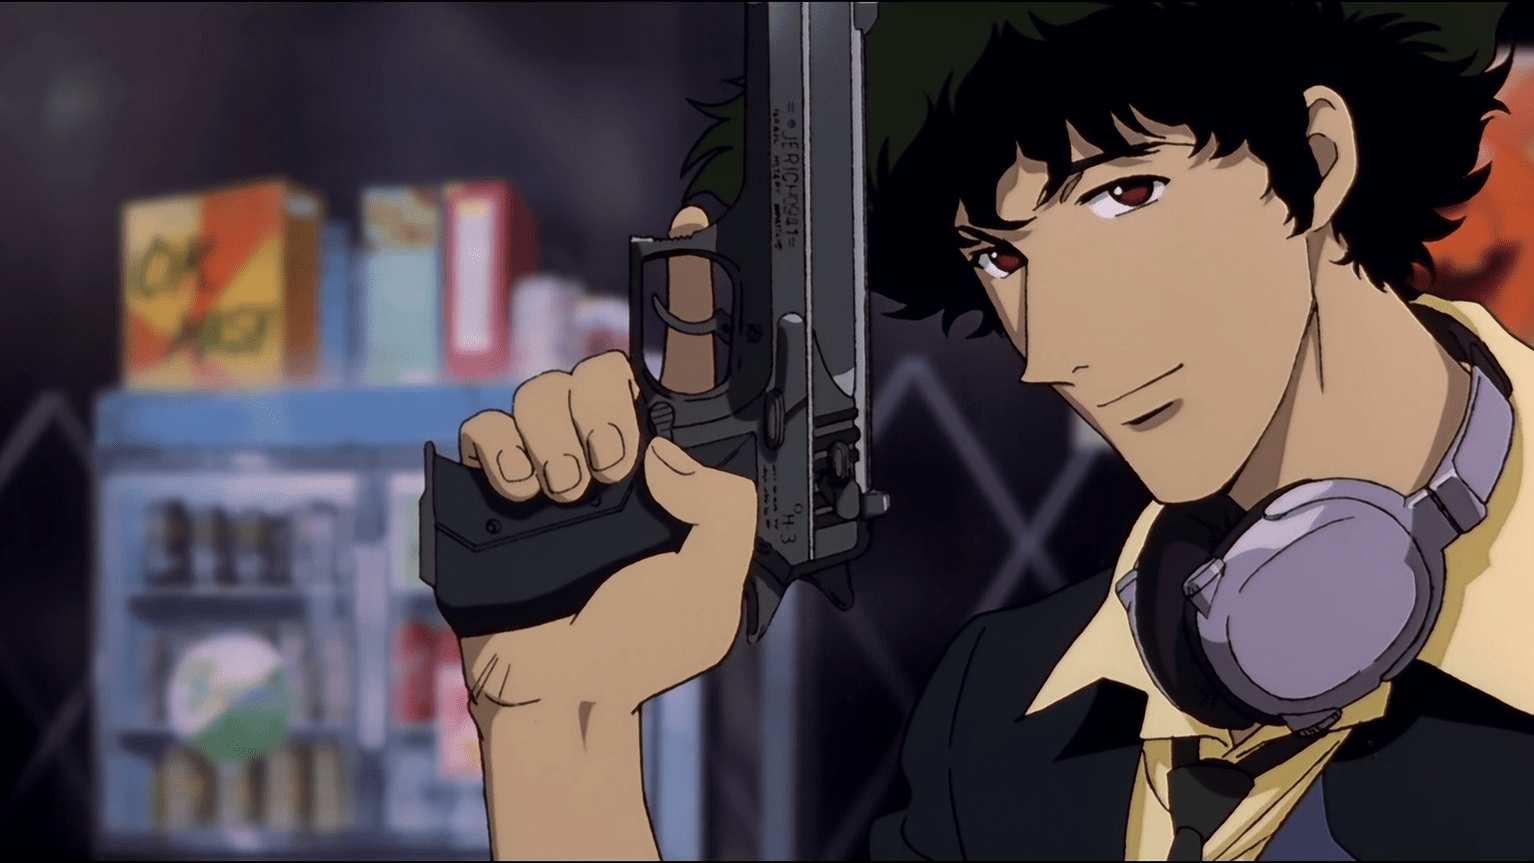 Spike Spiegel is one of the most memorable roles played by Koichi Yamadera